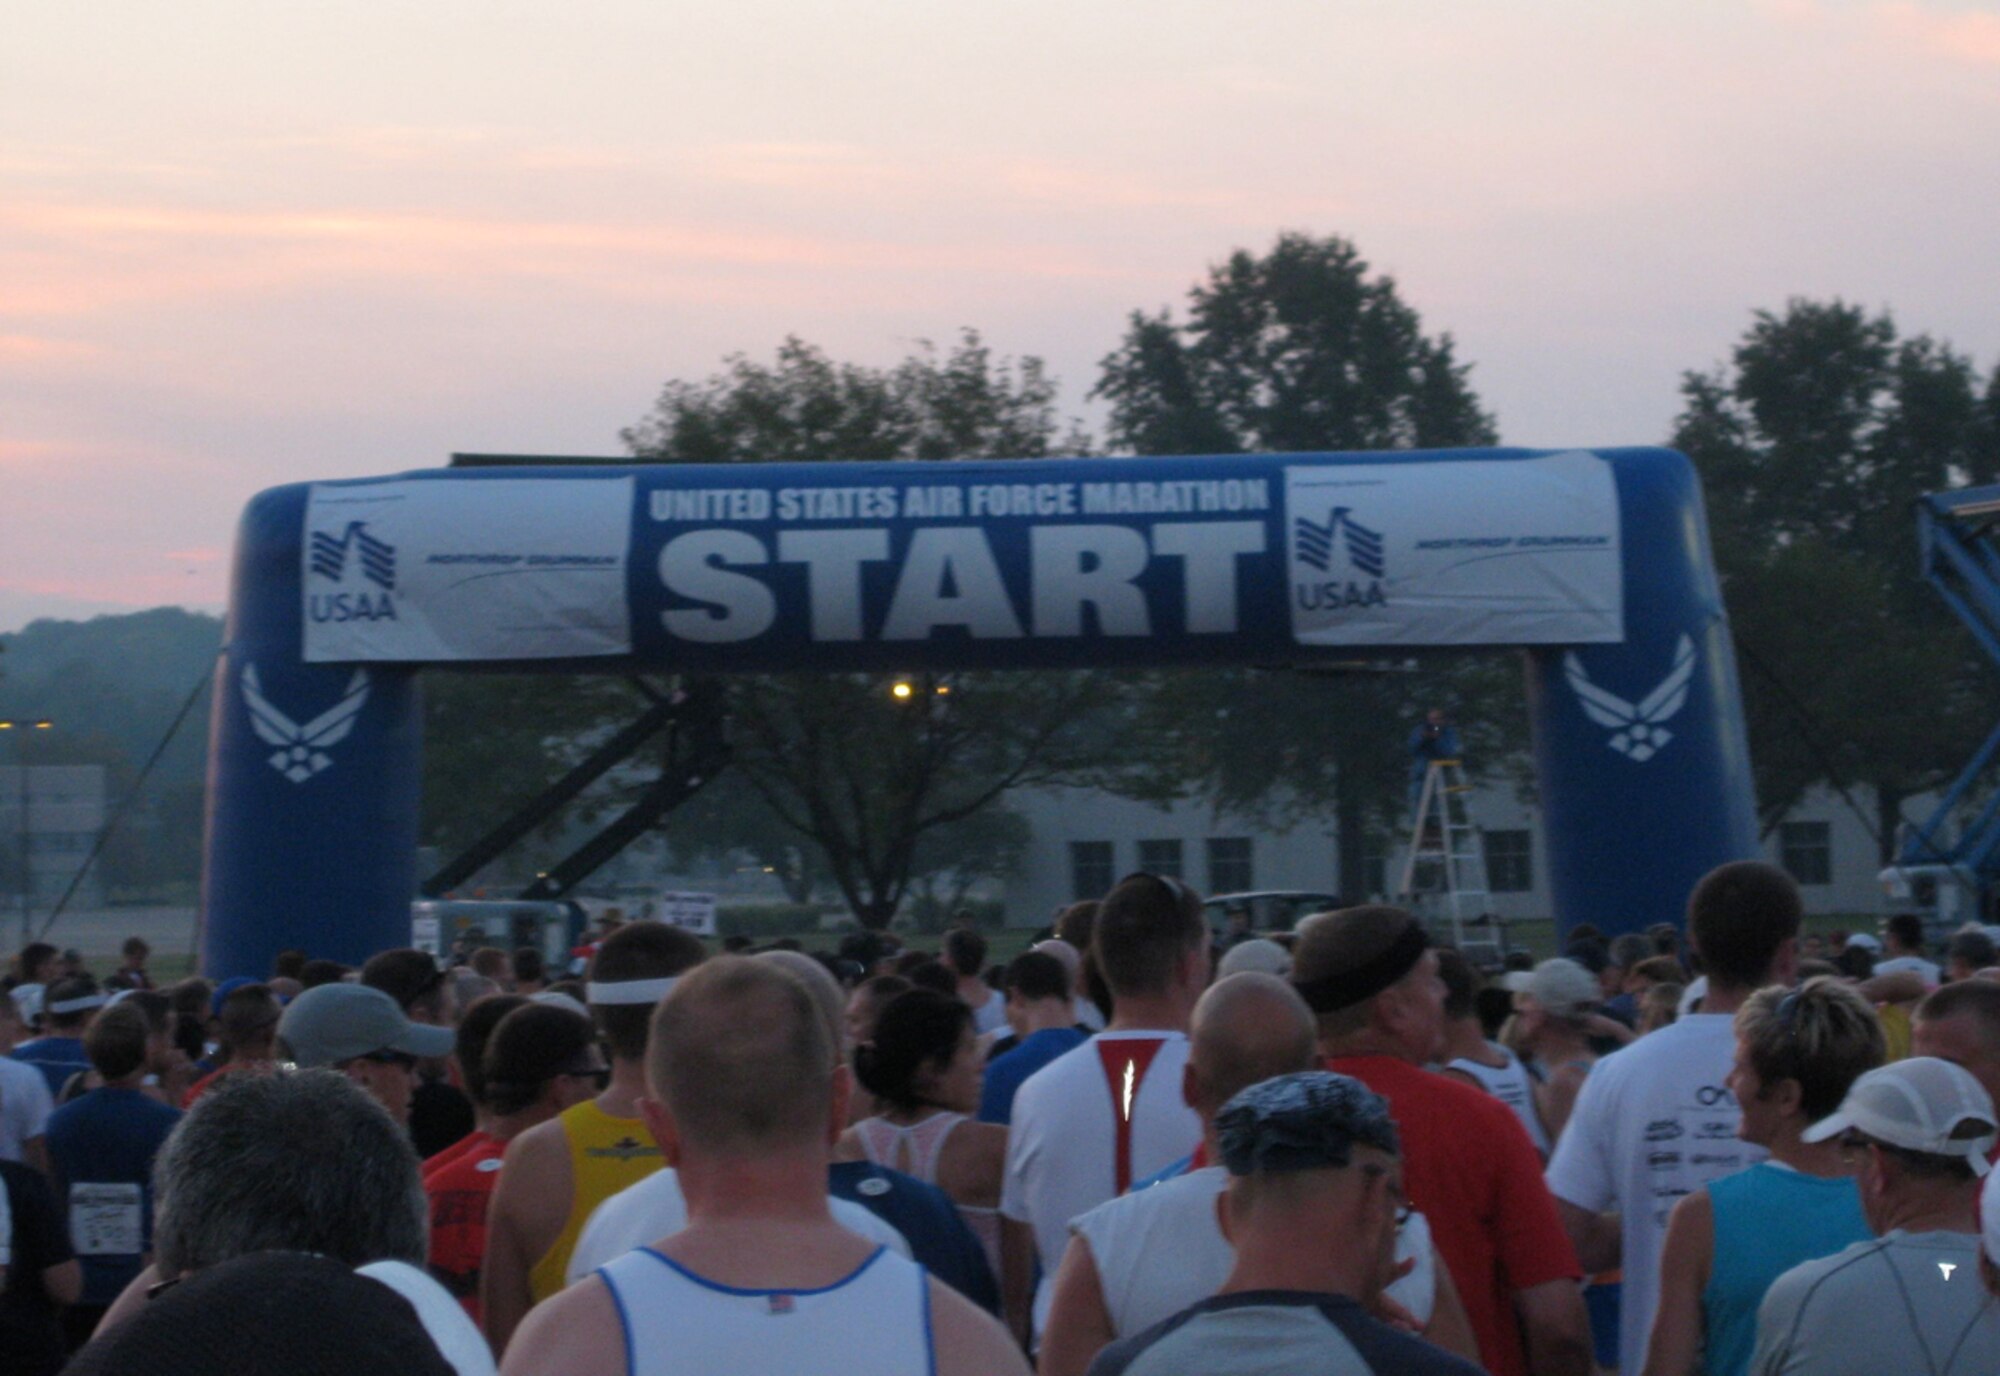 Runners line up at the start for the 12th Annual Air Force Marathon held at Wright-Patterson AFB, Sept. 20.